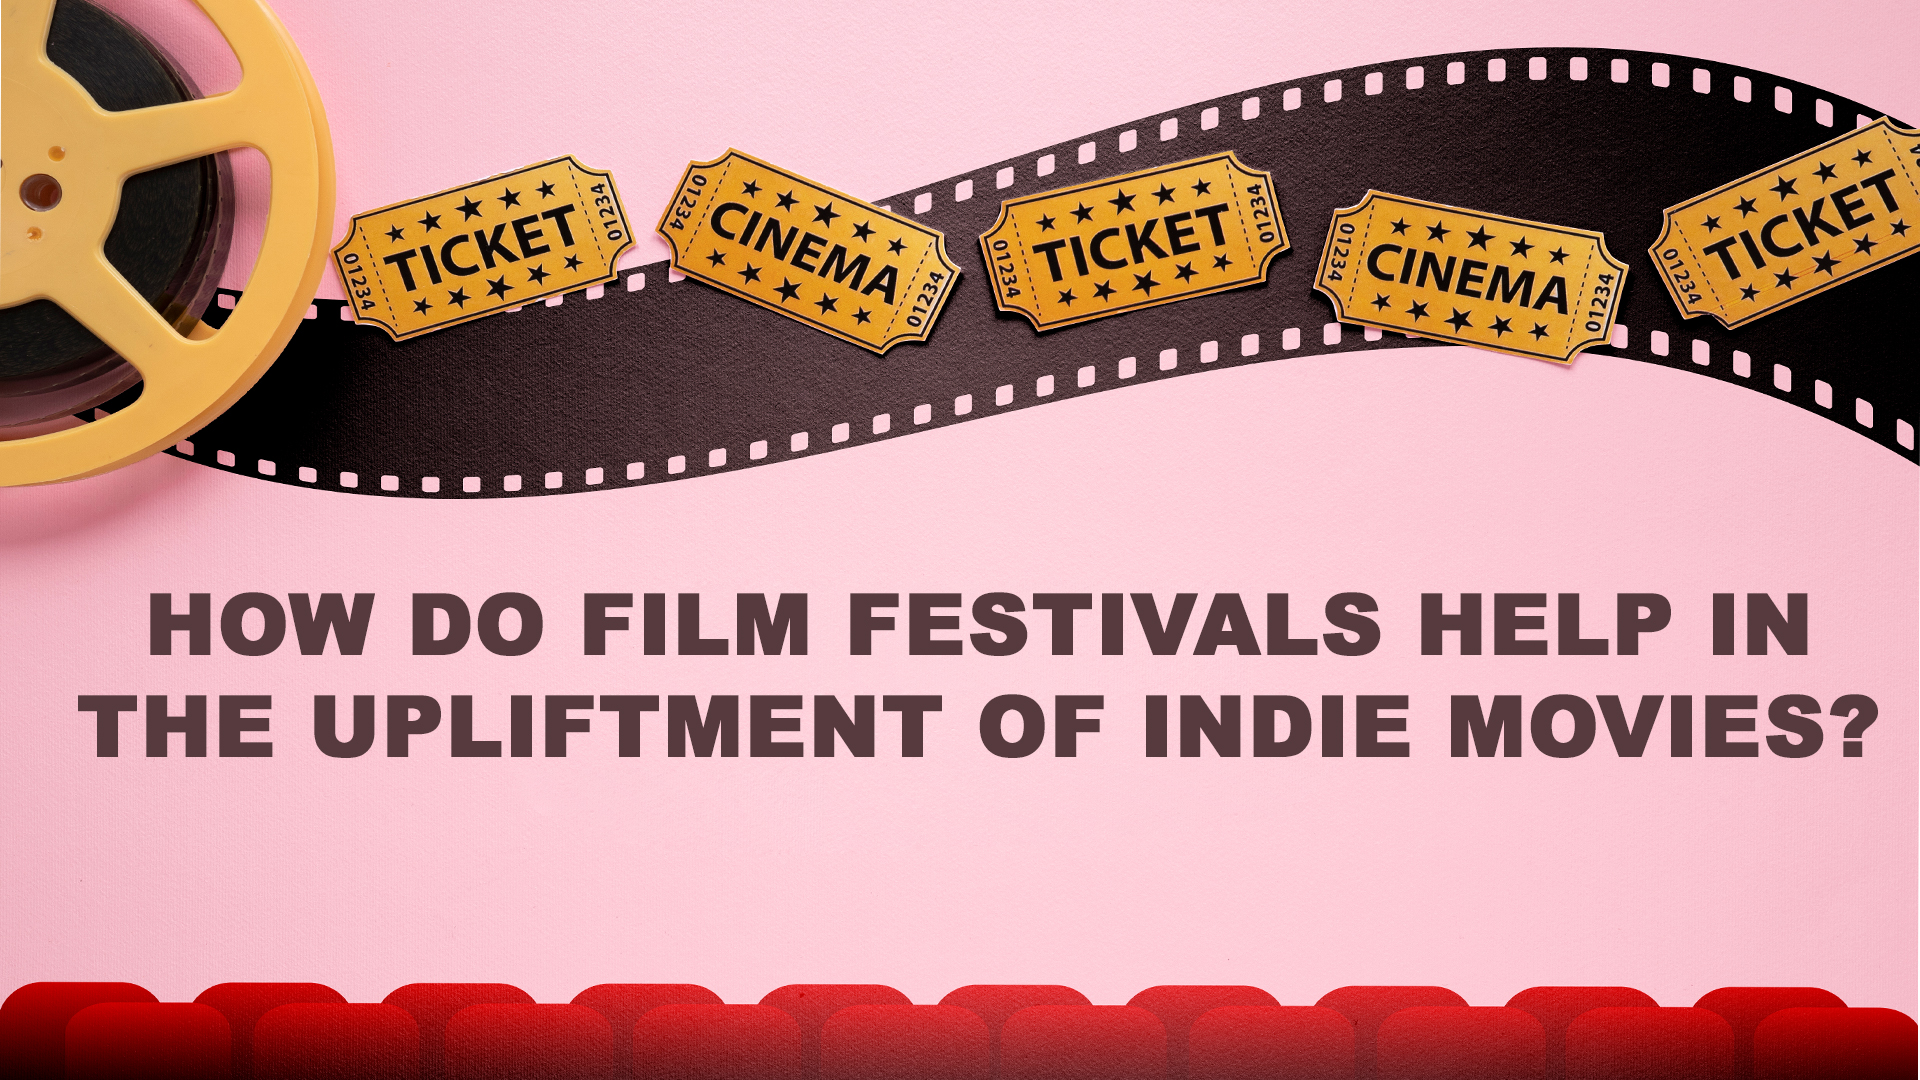 How do Film Festivals help in the upliftment of Indie Movies?